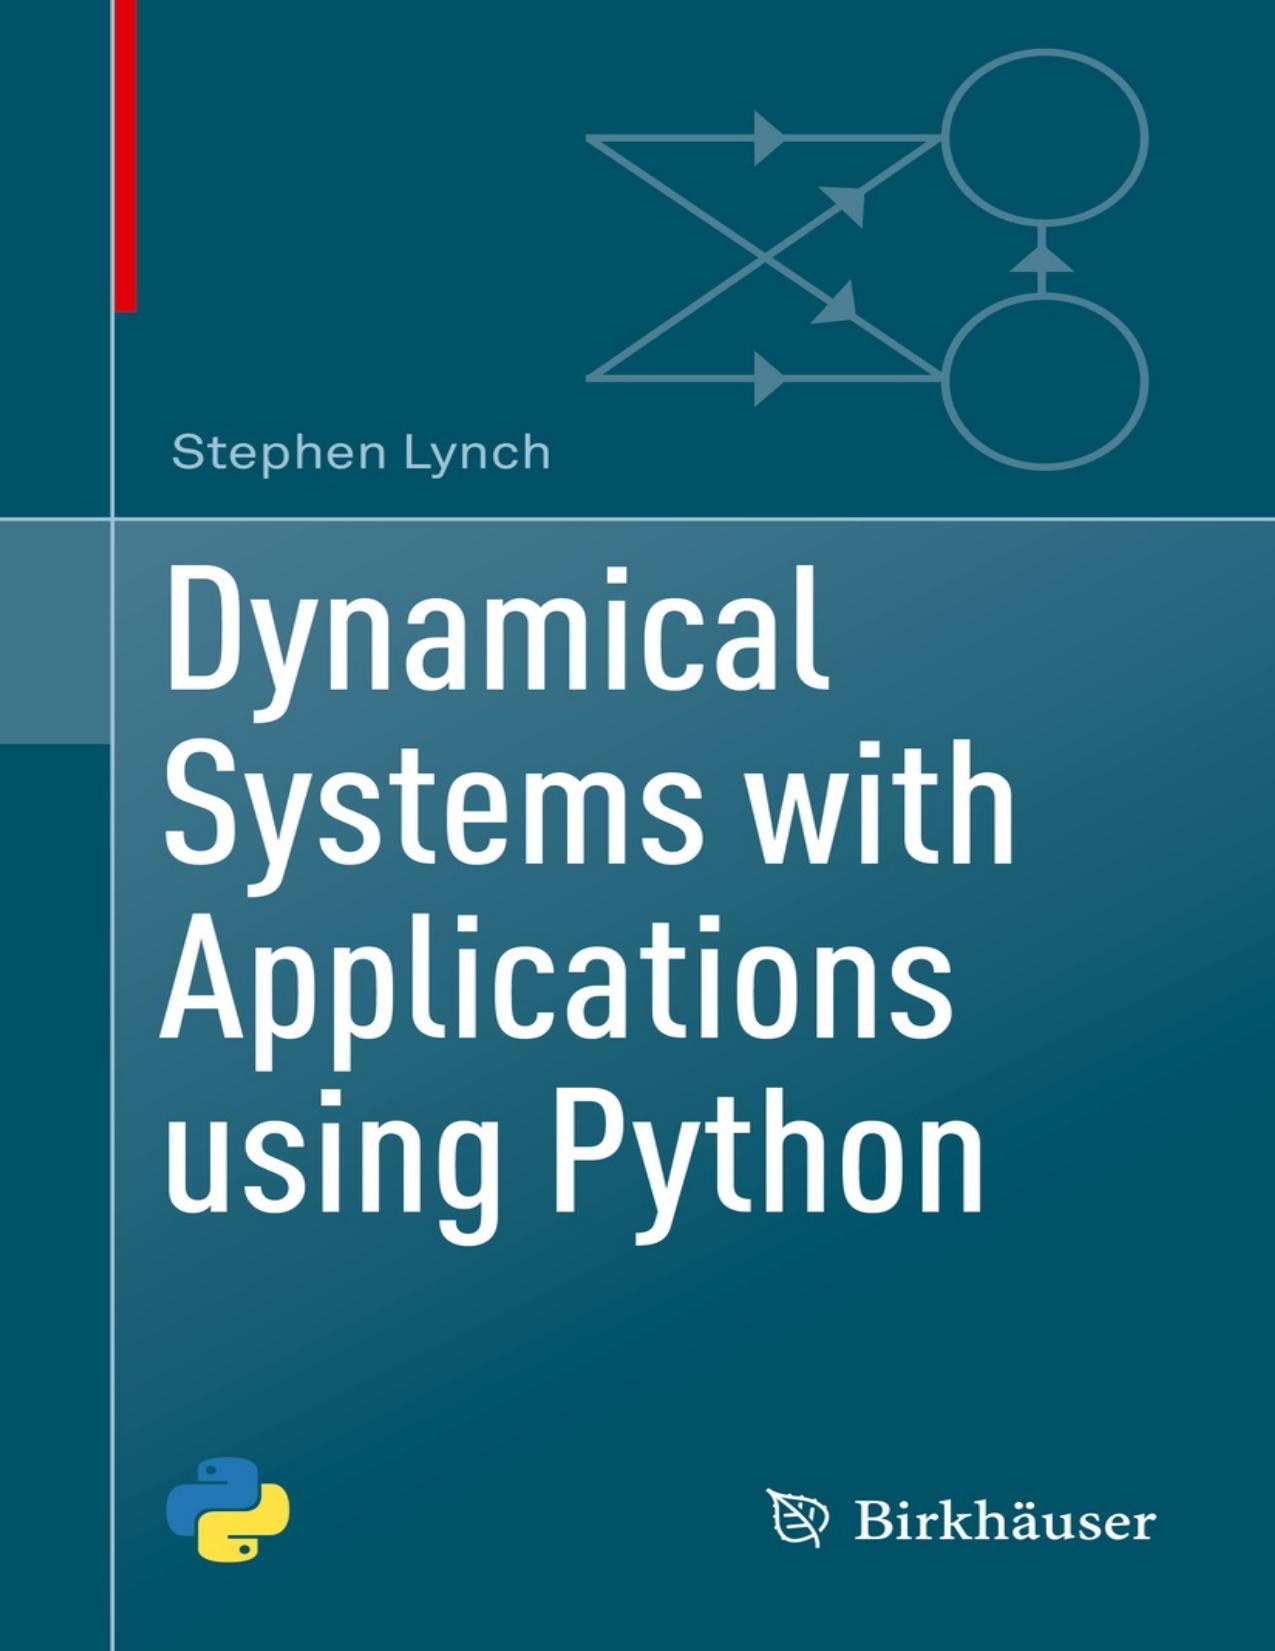 Dynamical Systems with Applications using Python - PDFDrive.com